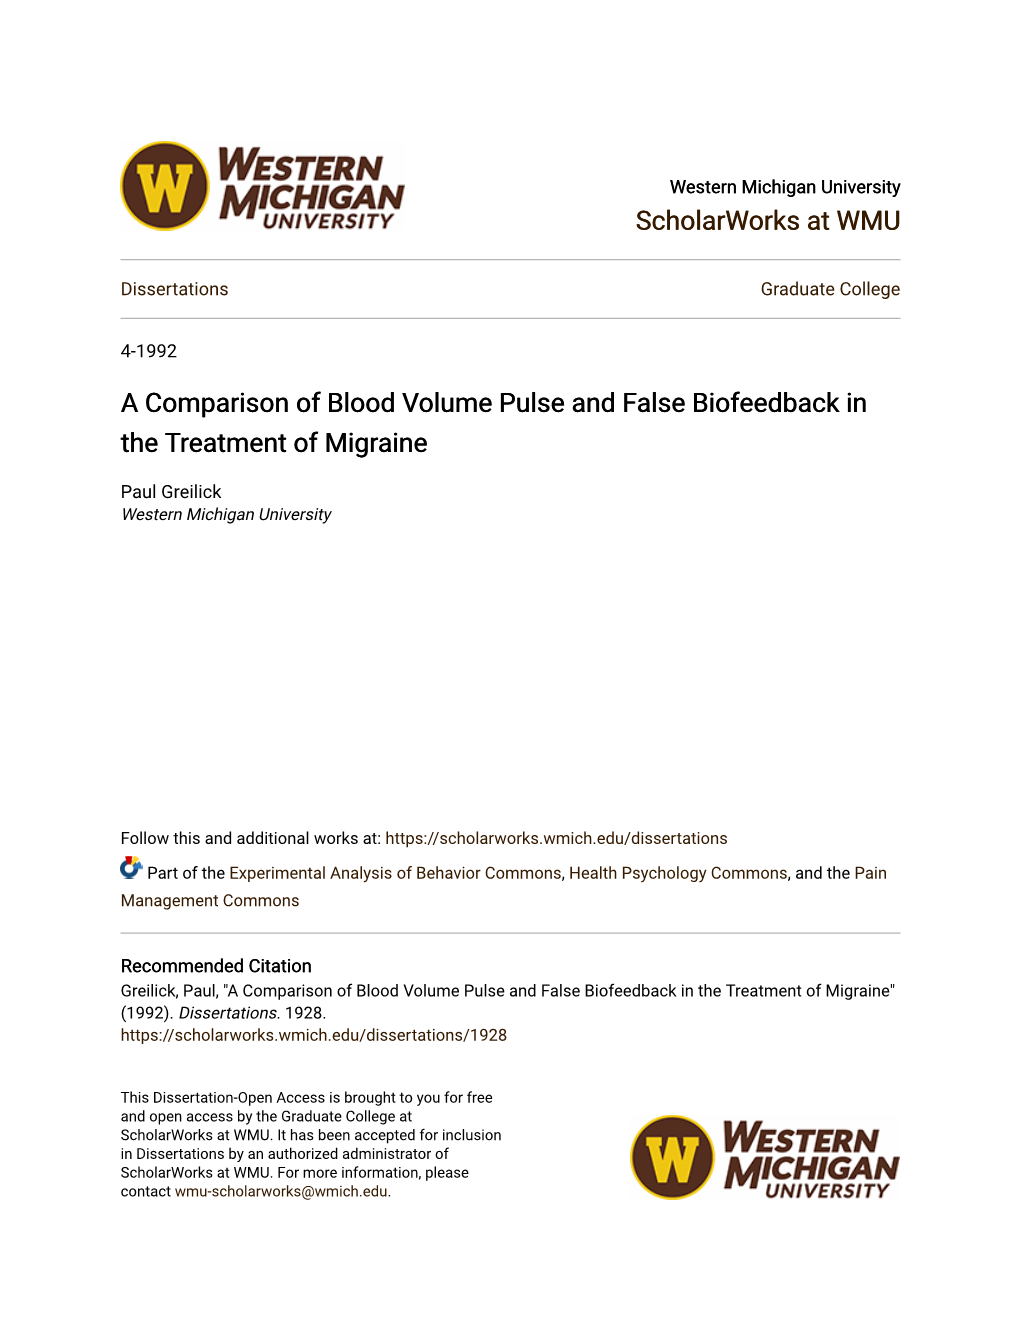 A Comparison of Blood Volume Pulse and False Biofeedback in the Treatment of Migraine